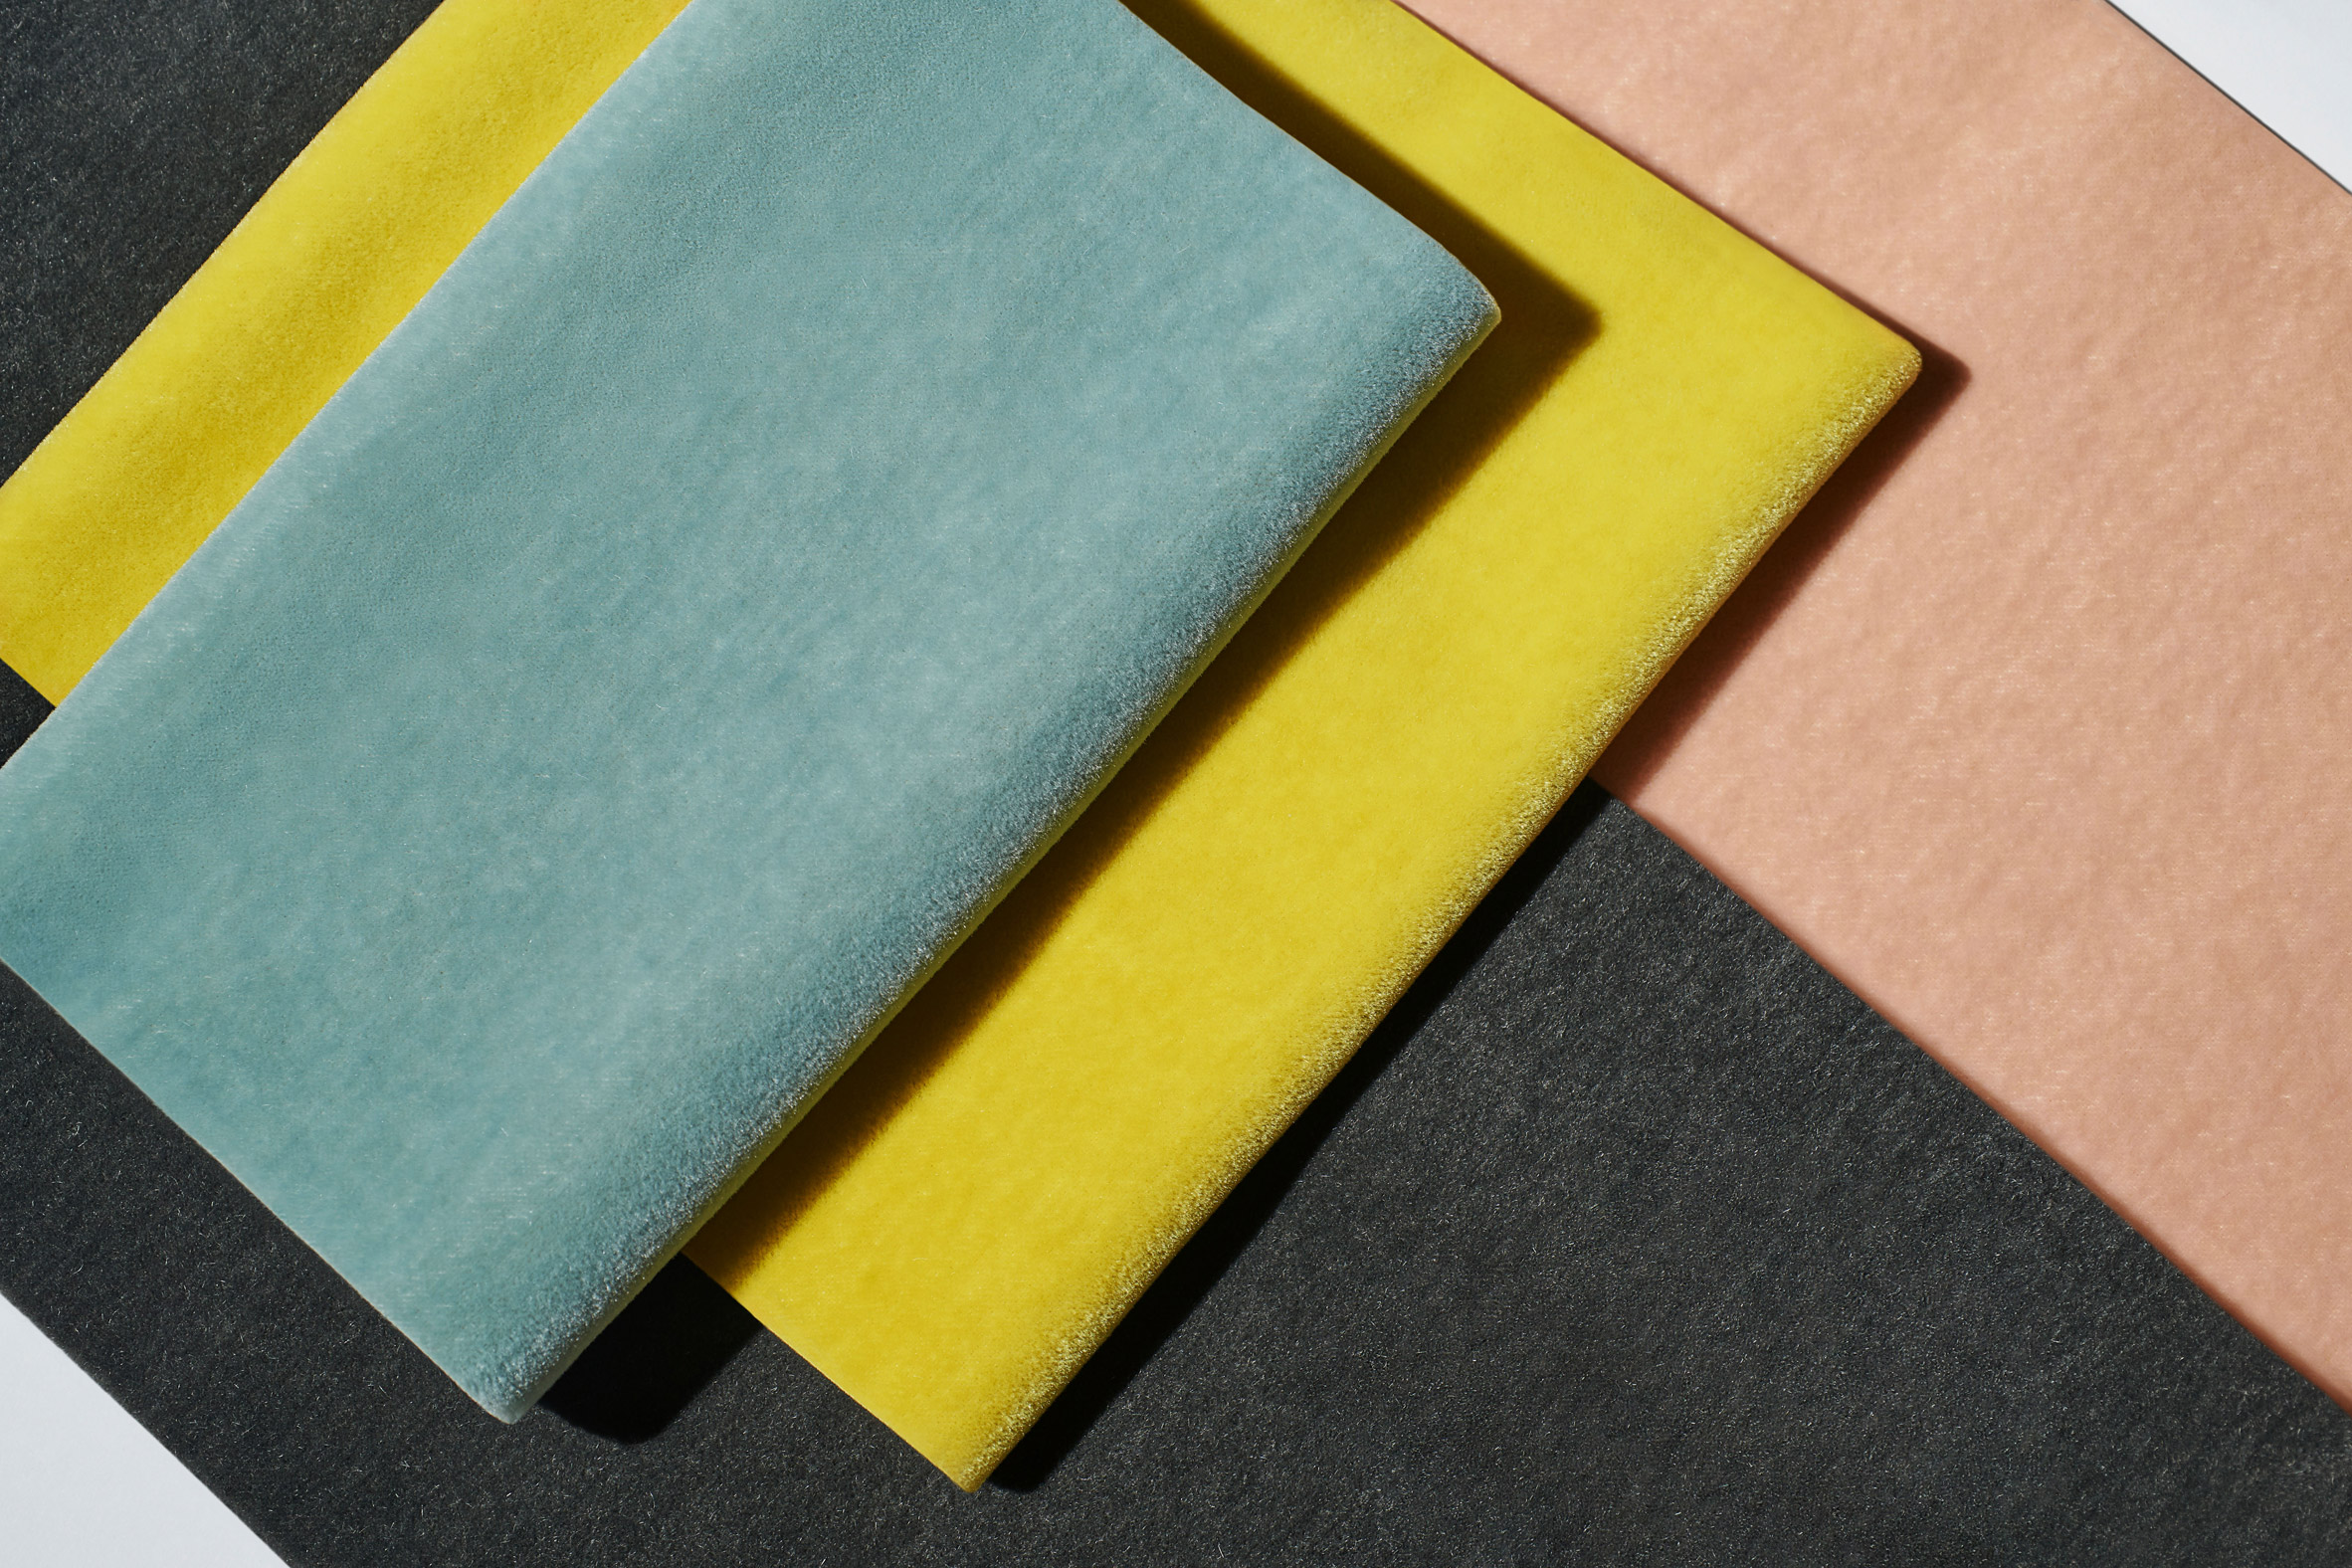 Dedar's Vladimiro velvet laid out in sheets of different colours including yellow and light blue